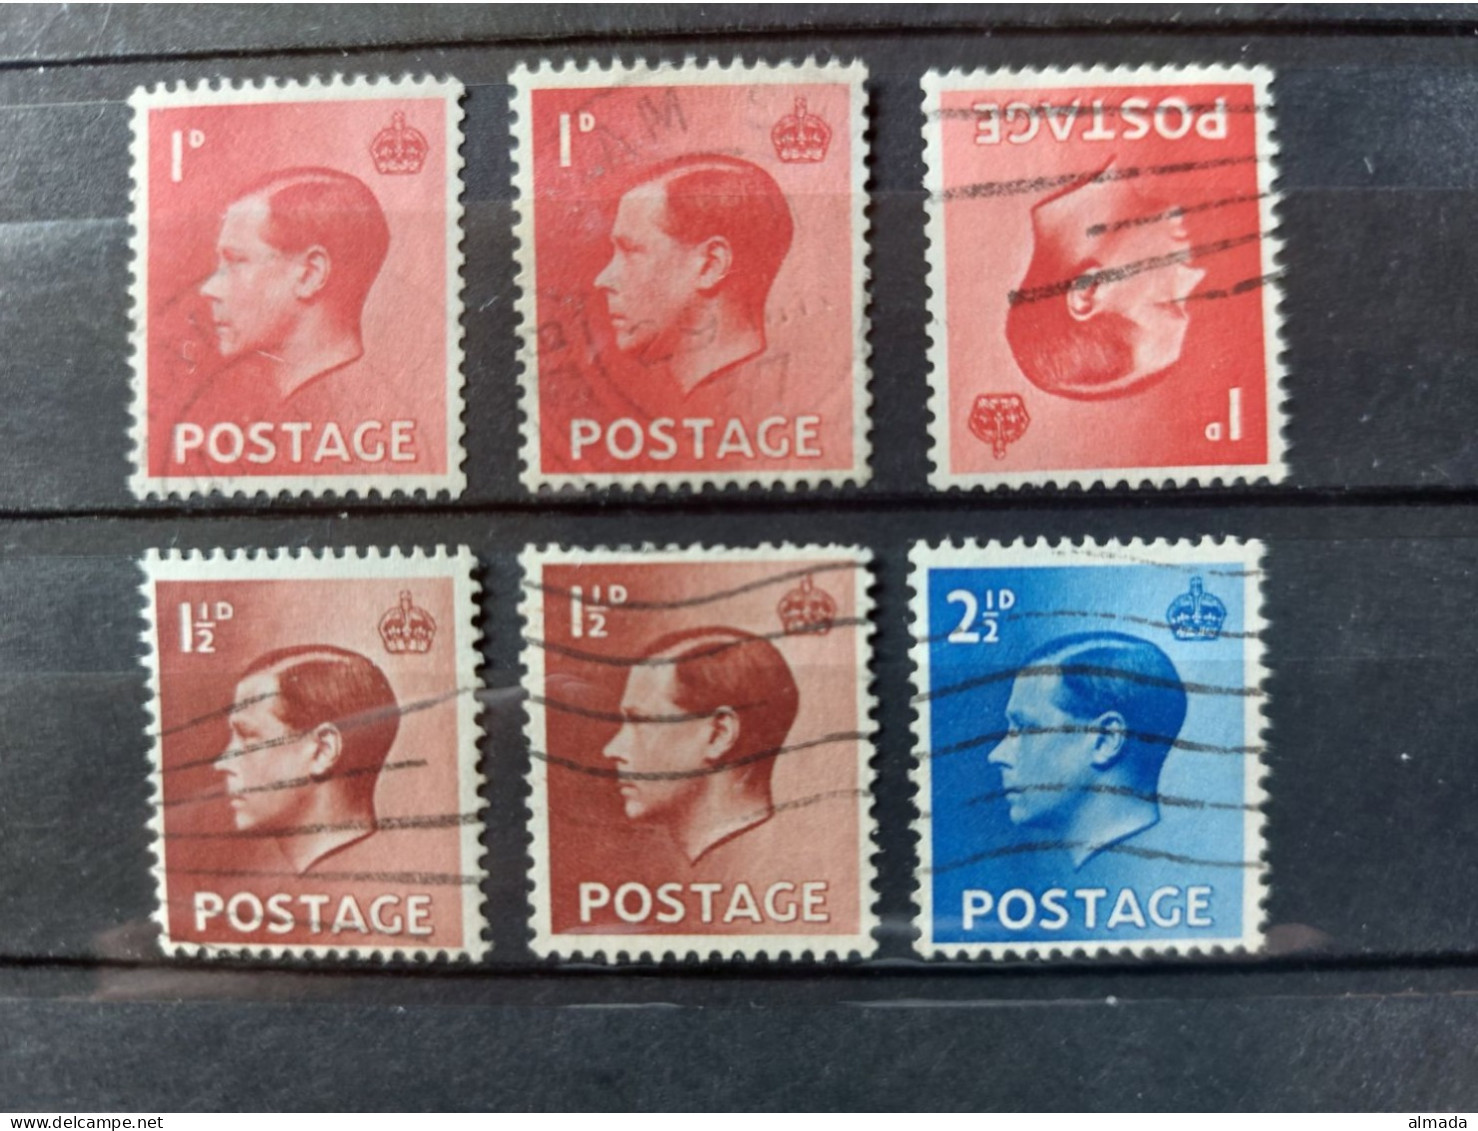 UK 1936: 6 Used Stamps, 1d With 2 Positions Of The Wmk. - Gebruikt